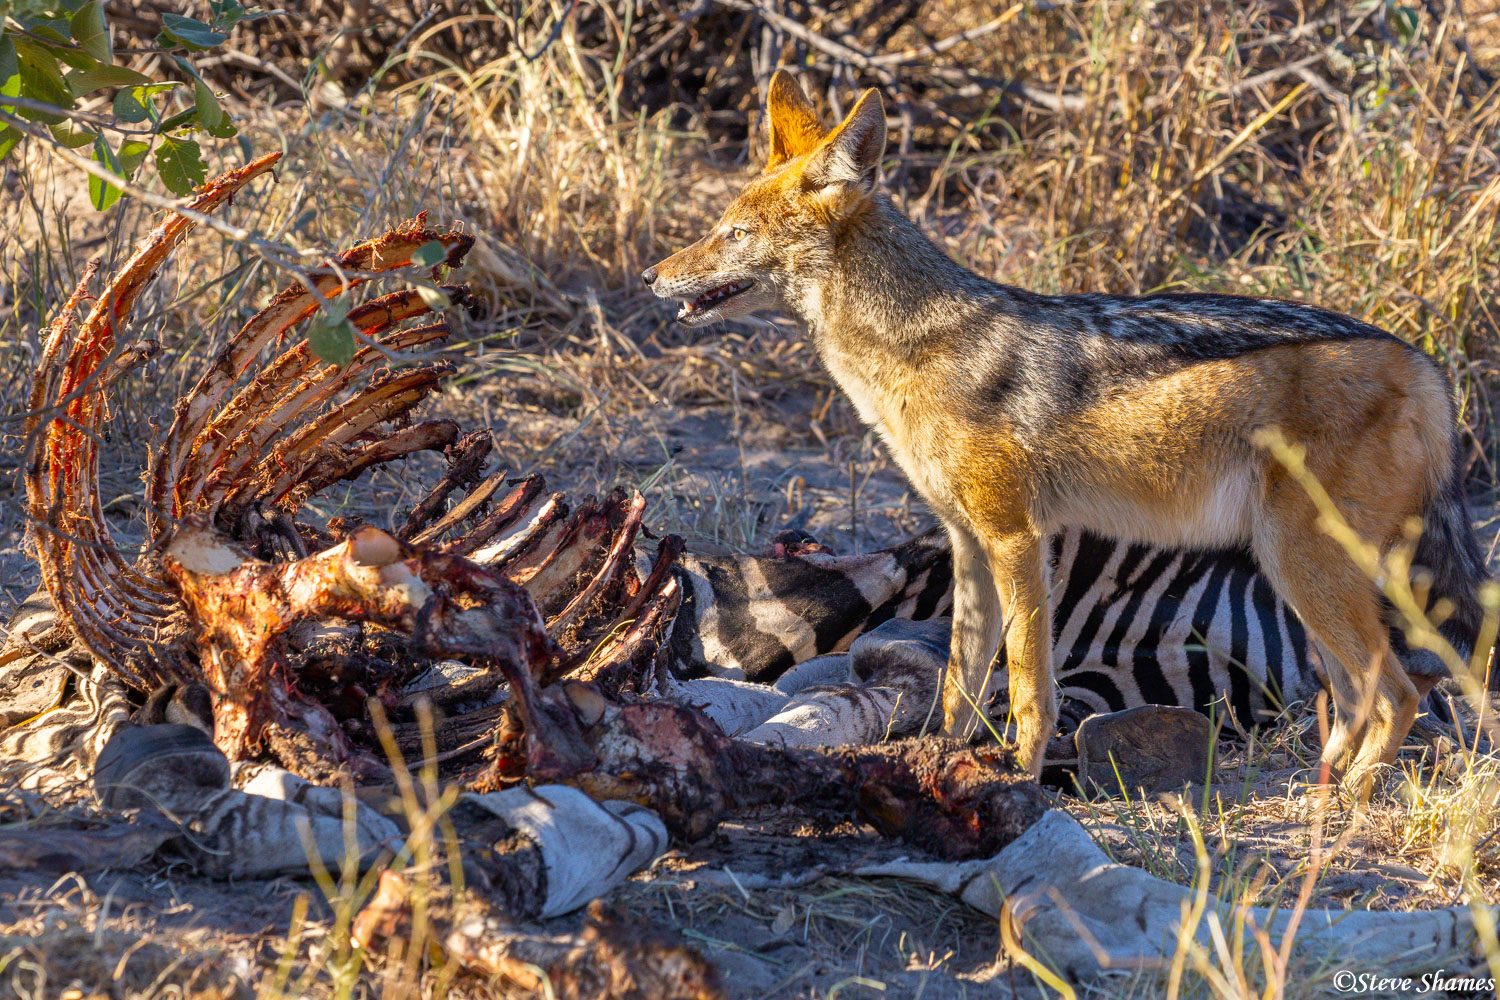 Jackal with a zebra carcass. Not much left after the vultures finished with it.